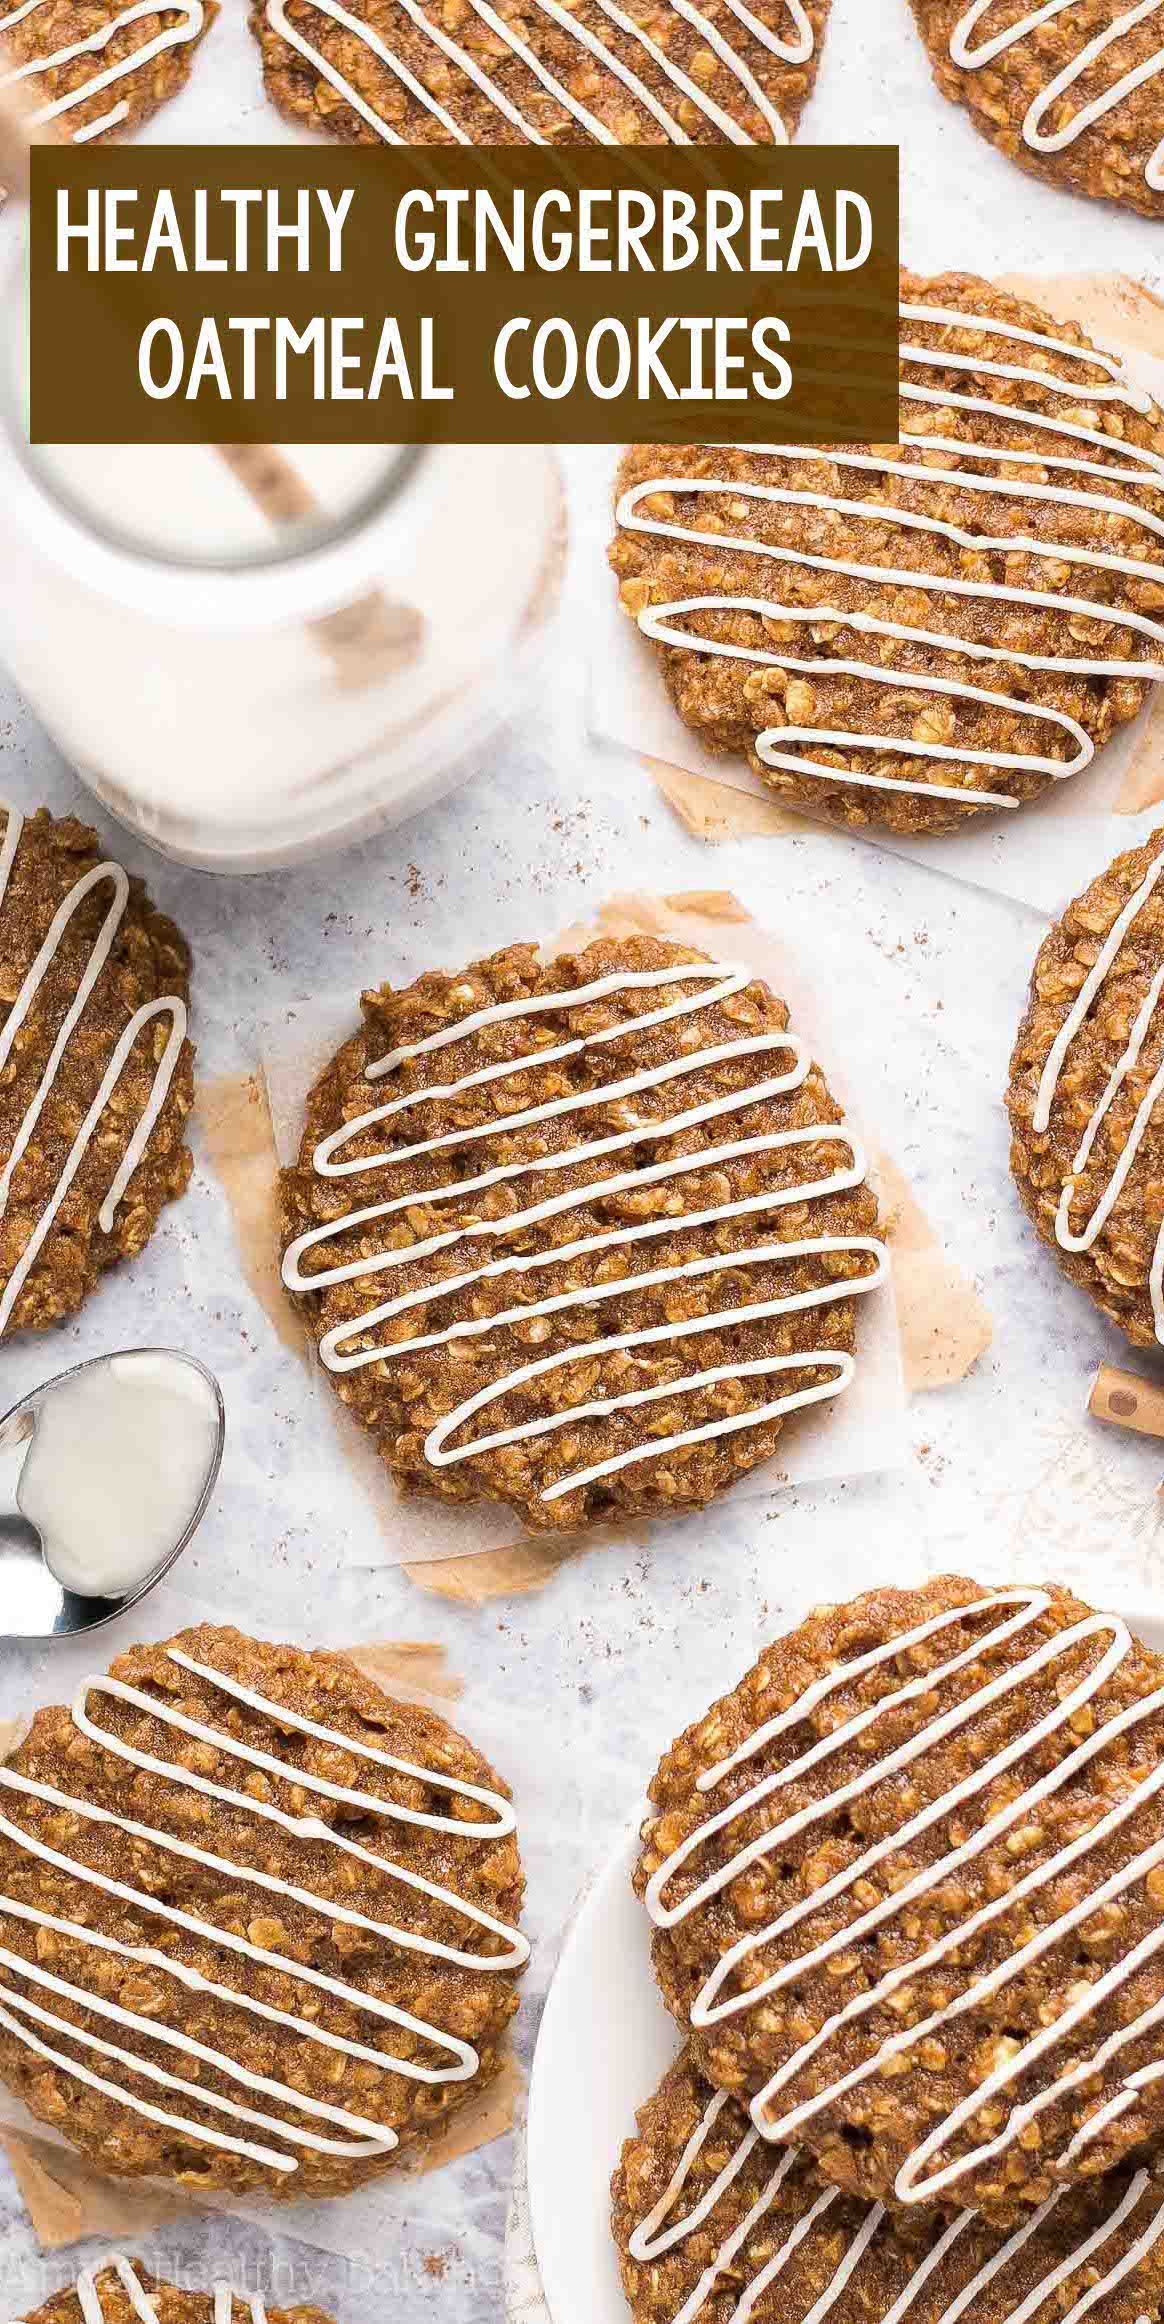 Healthy Iced Gingerbread Oatmeal Cookies -   17 holiday Cookies healthy ideas